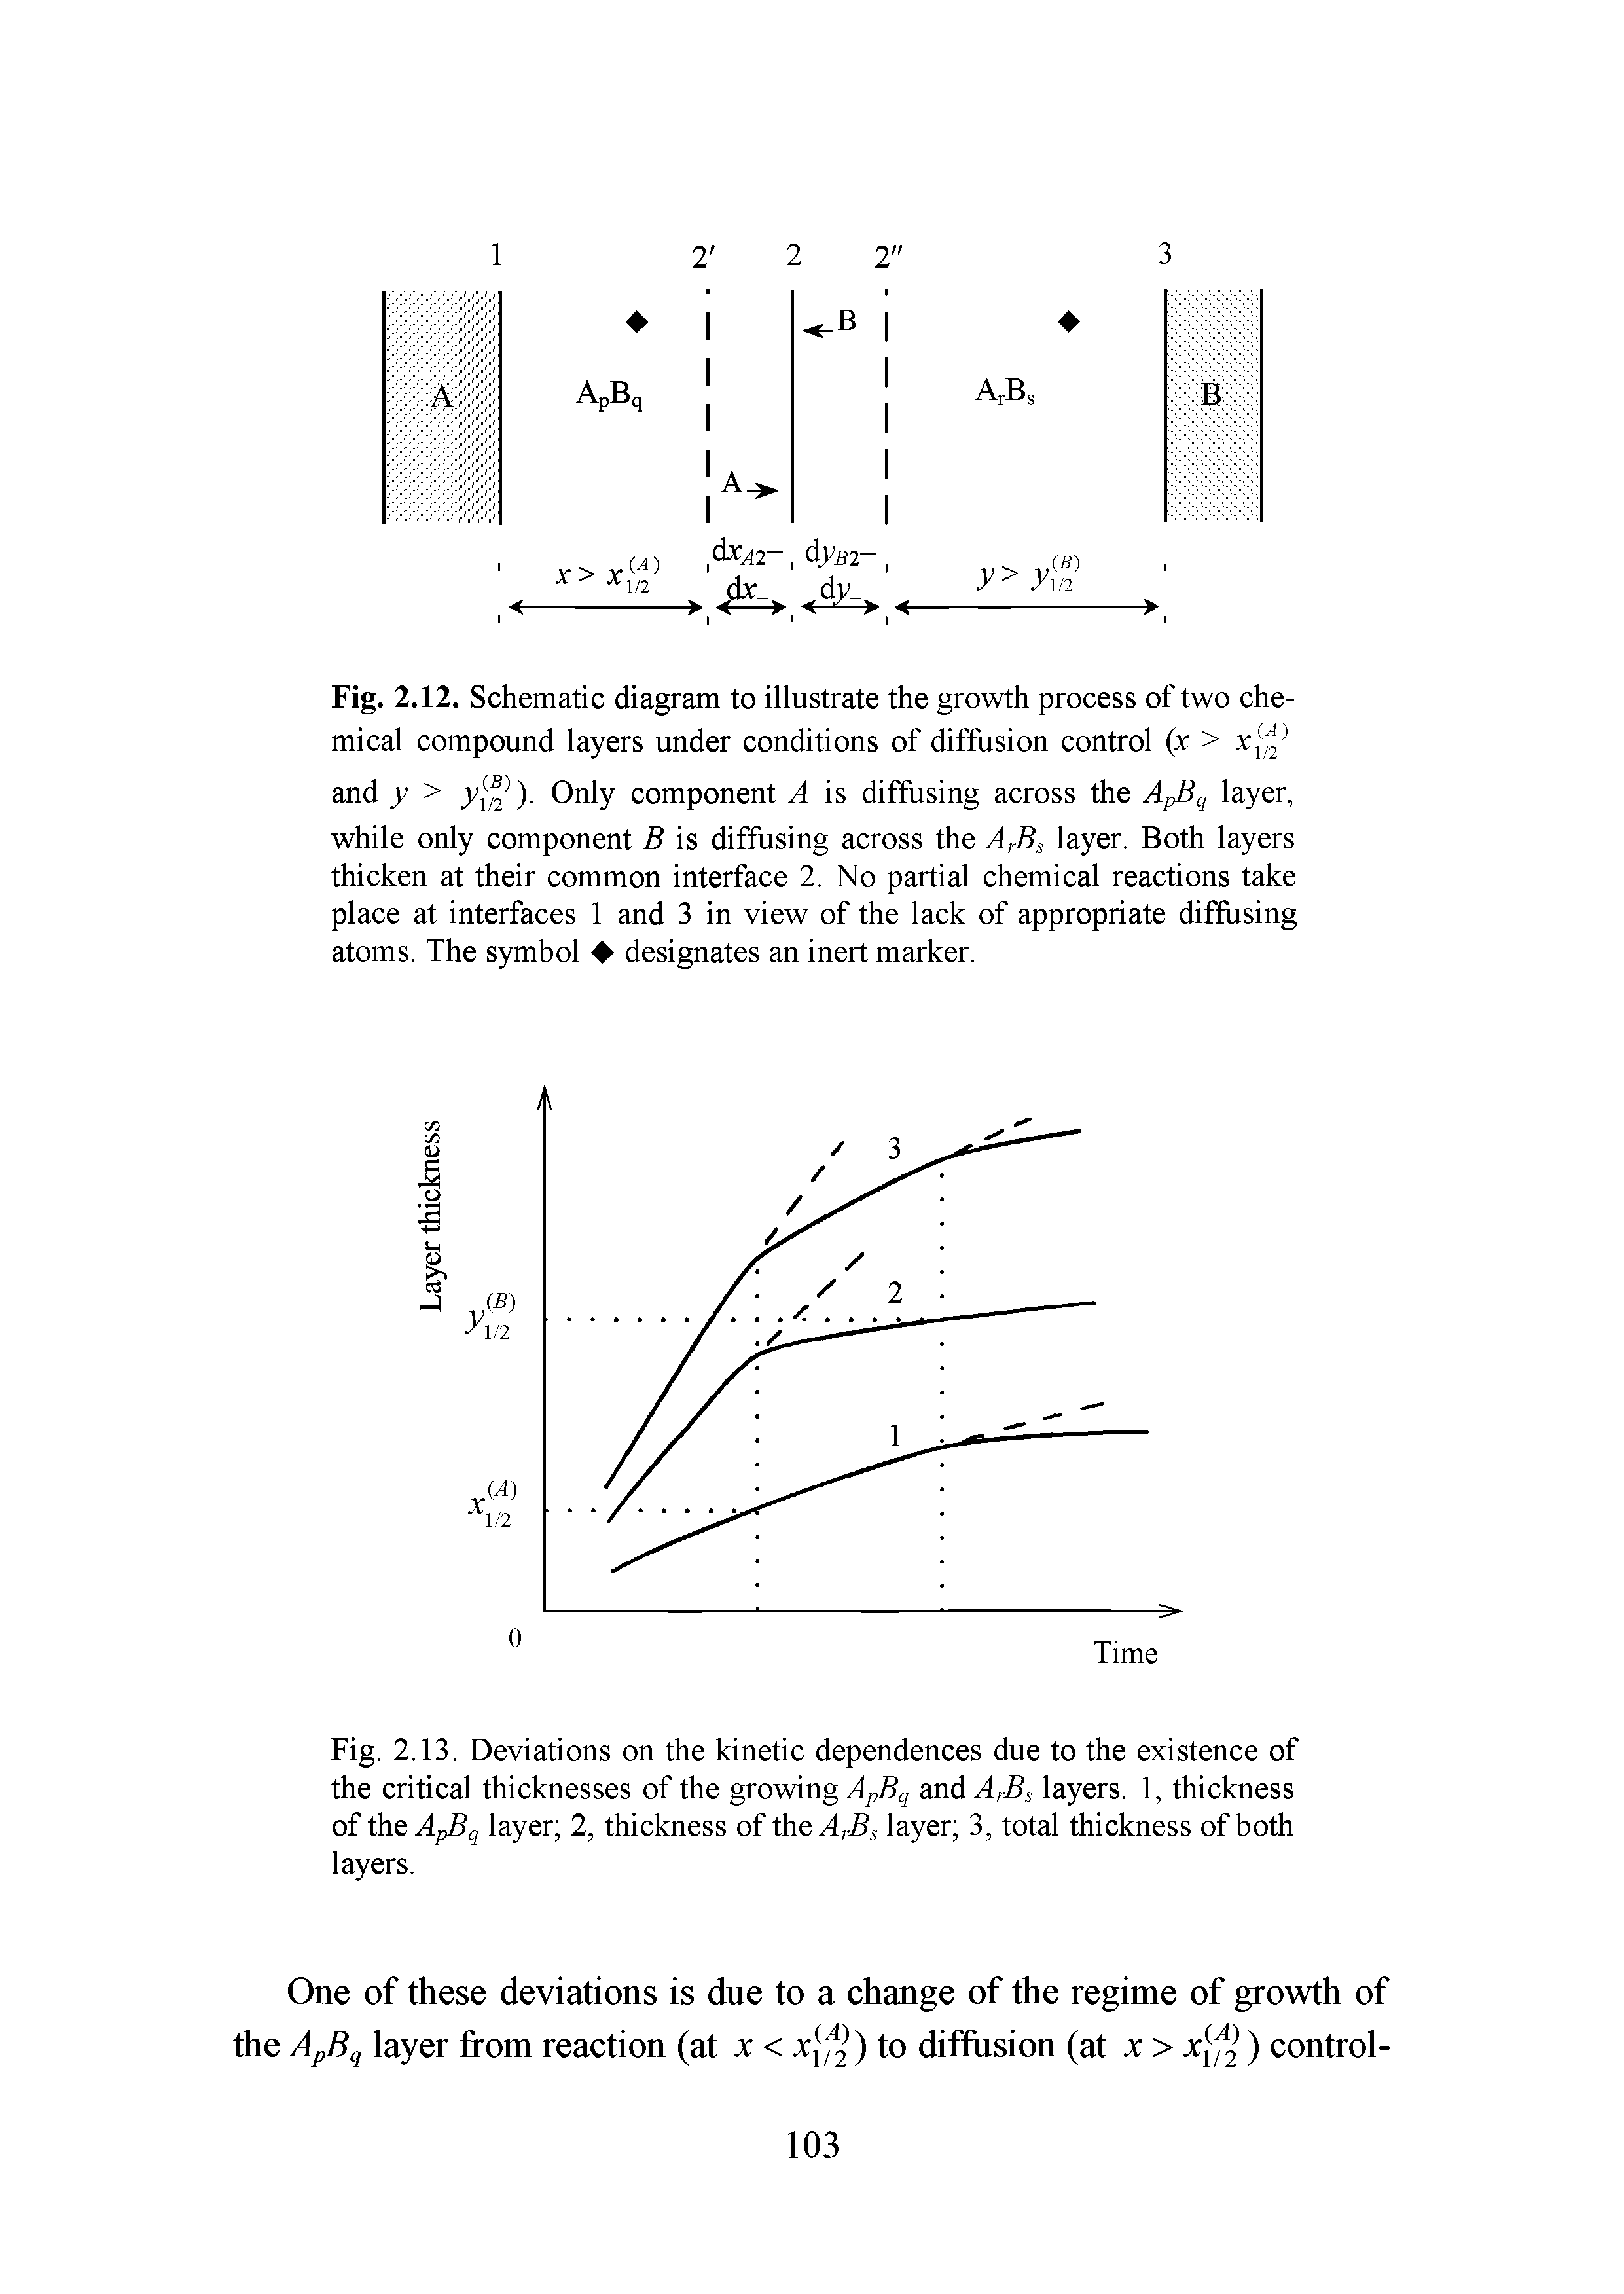 Fig. 2.12. Schematic diagram to illustrate the growth process of two chemical compound layers under conditions of diffusion control (x > x -1...